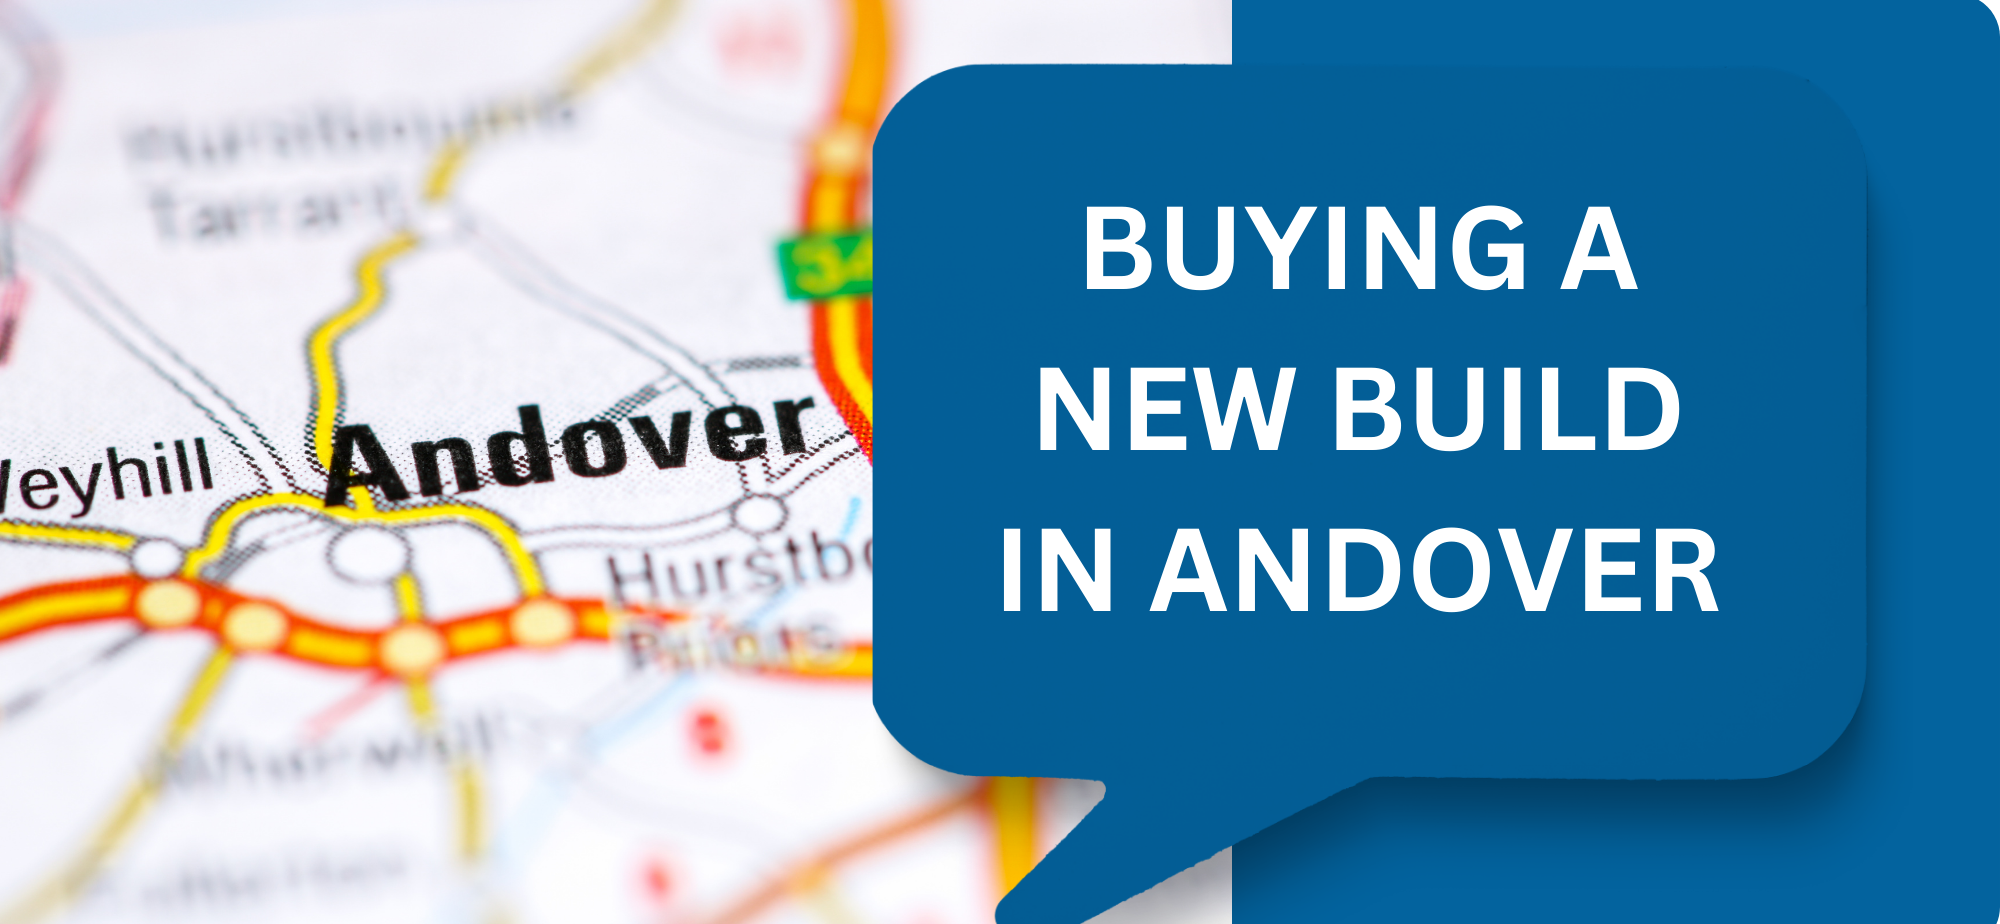 Buying a new build home in Andover